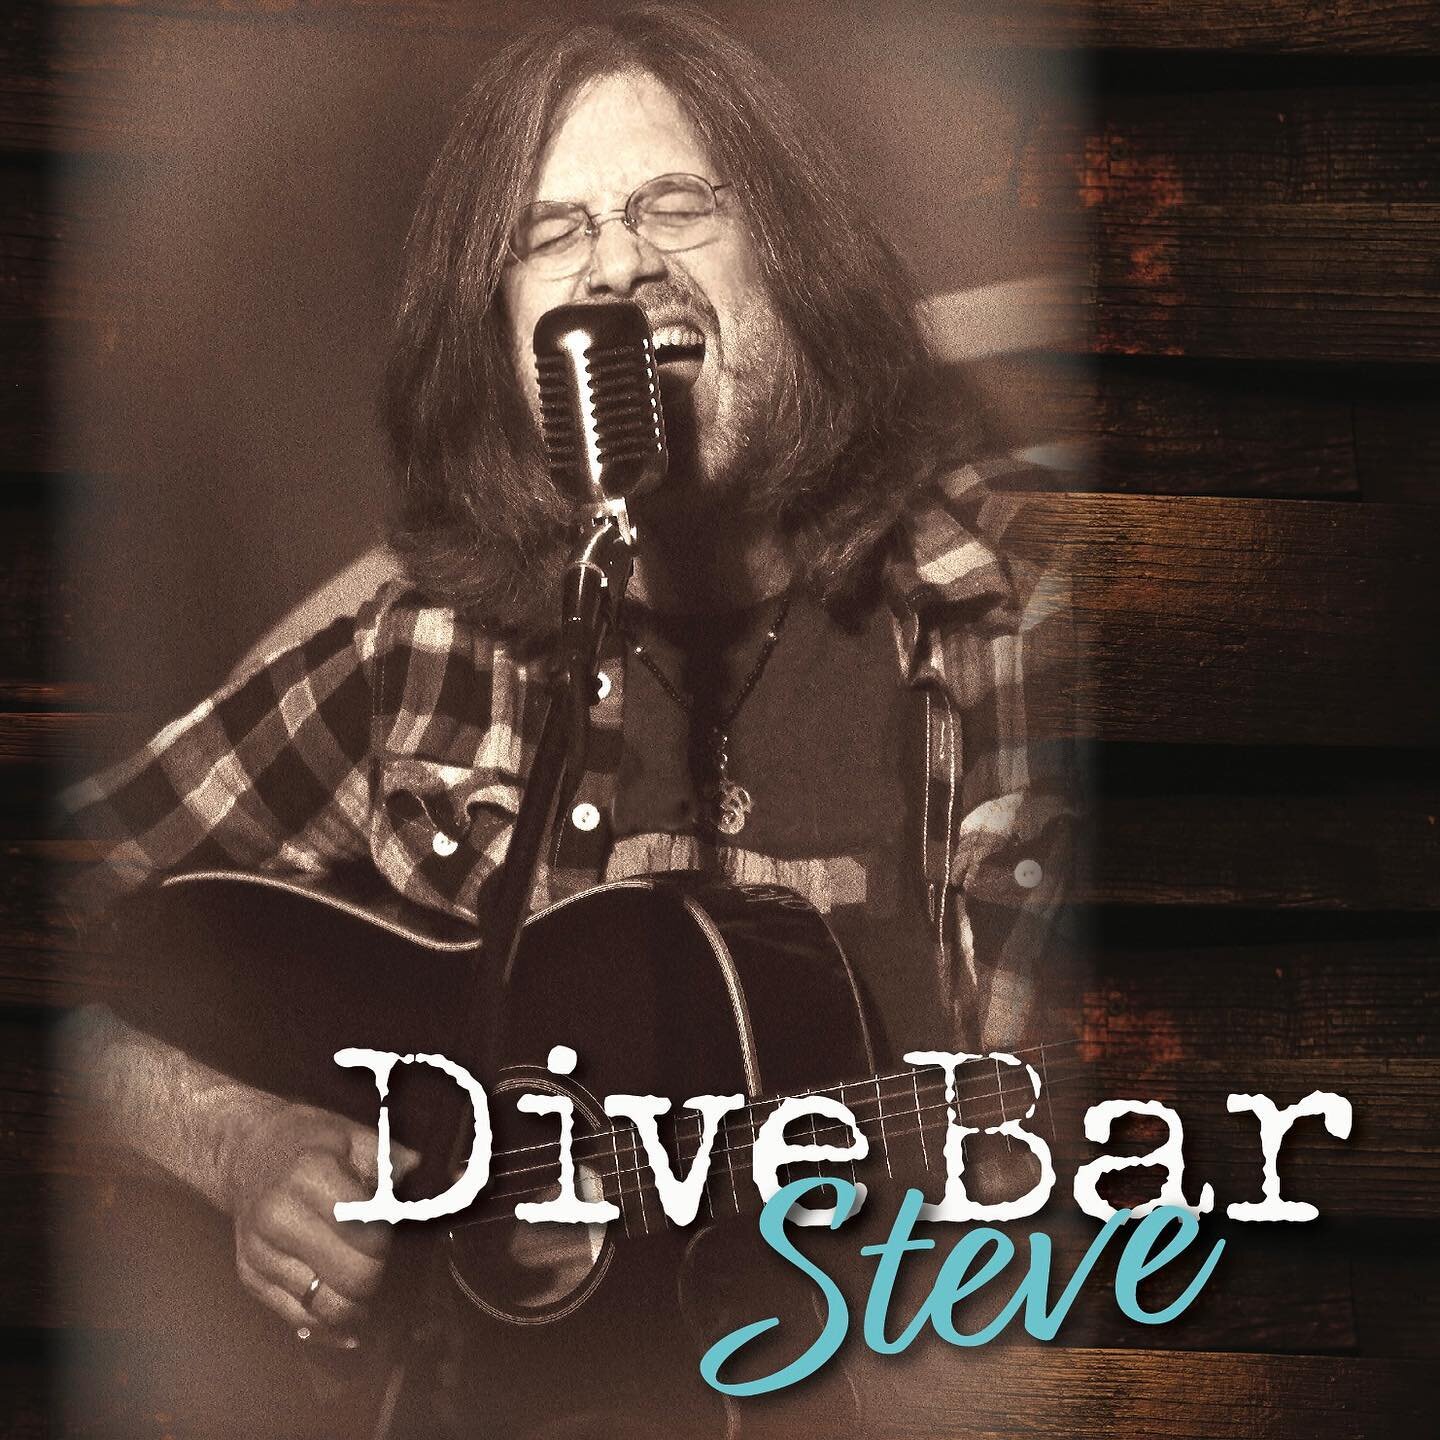 Open Labor Day! 11-7. Music 2-5 with Dive Bar Steve @dive_bar_steve is always a great time! Come enjoy your day off in cooler Downtown with music and cocktails. 

#LiveMusic #VenturaNightLife #VenturaEvents #Ventura #VisitVentura #DowntownVentura #Ve